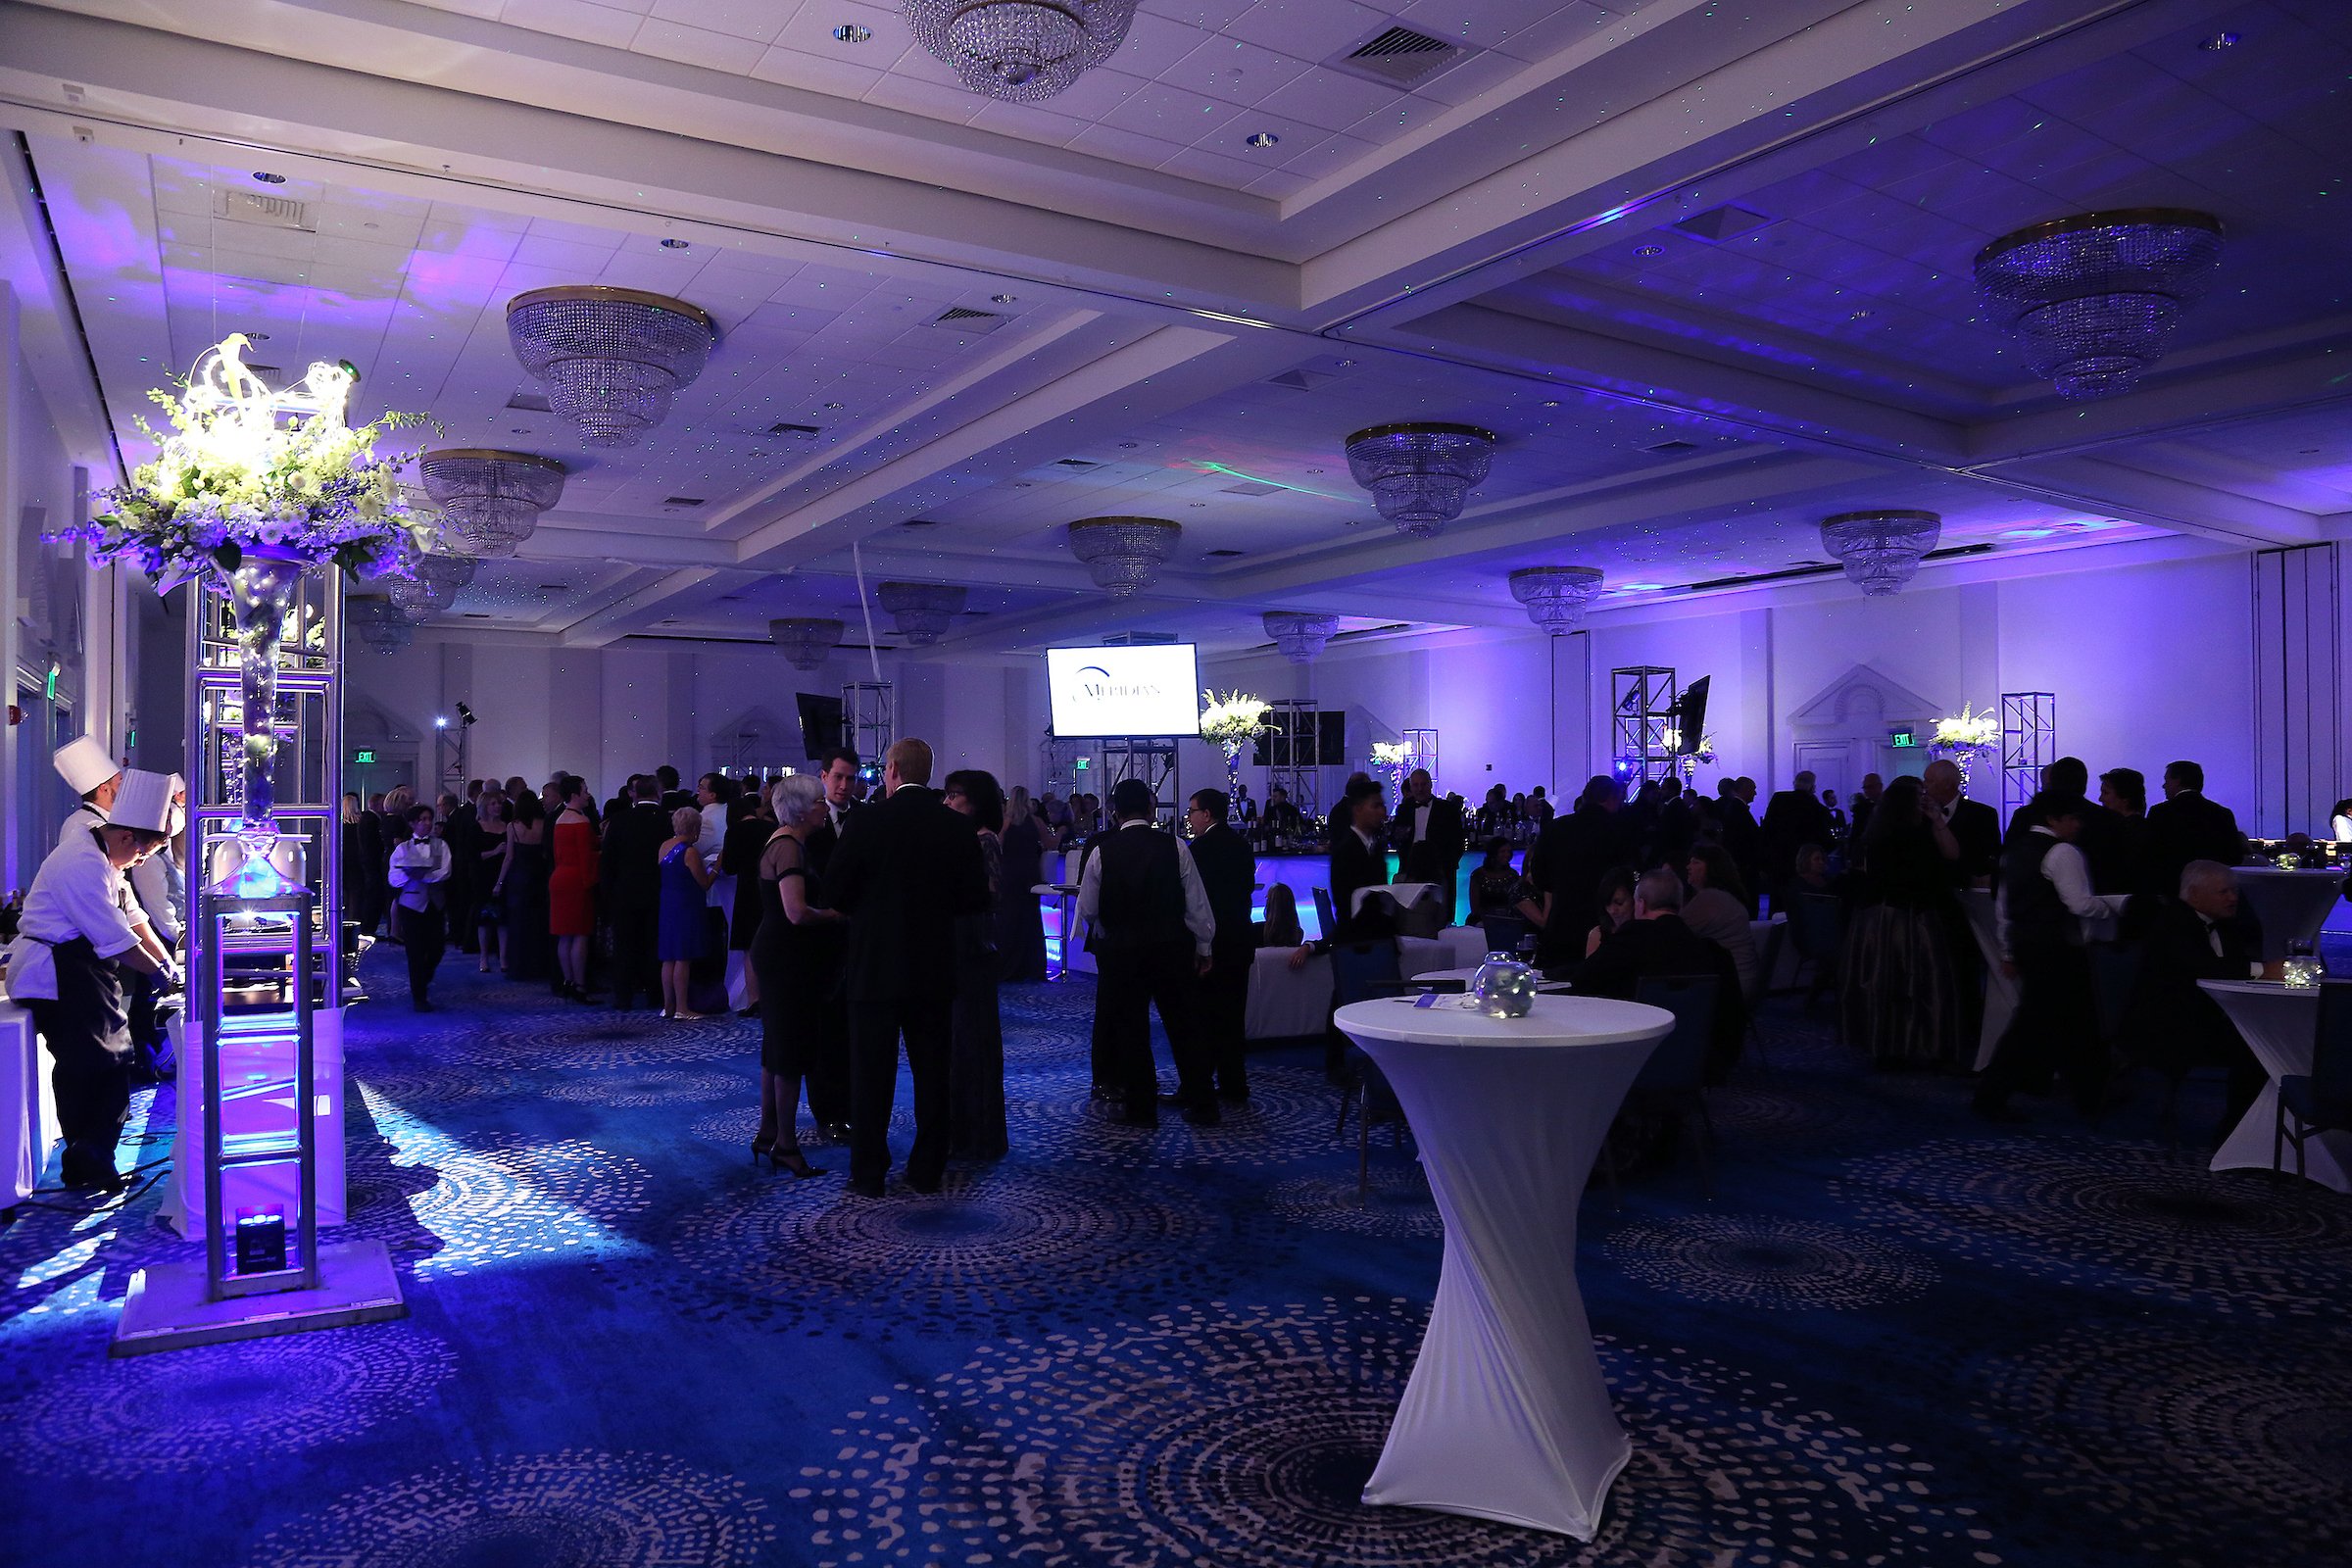  Meridian Health Affiliated Foundations Annual Gala at the Ocean Place in Long Branch, New Jersey. 11/19/16 